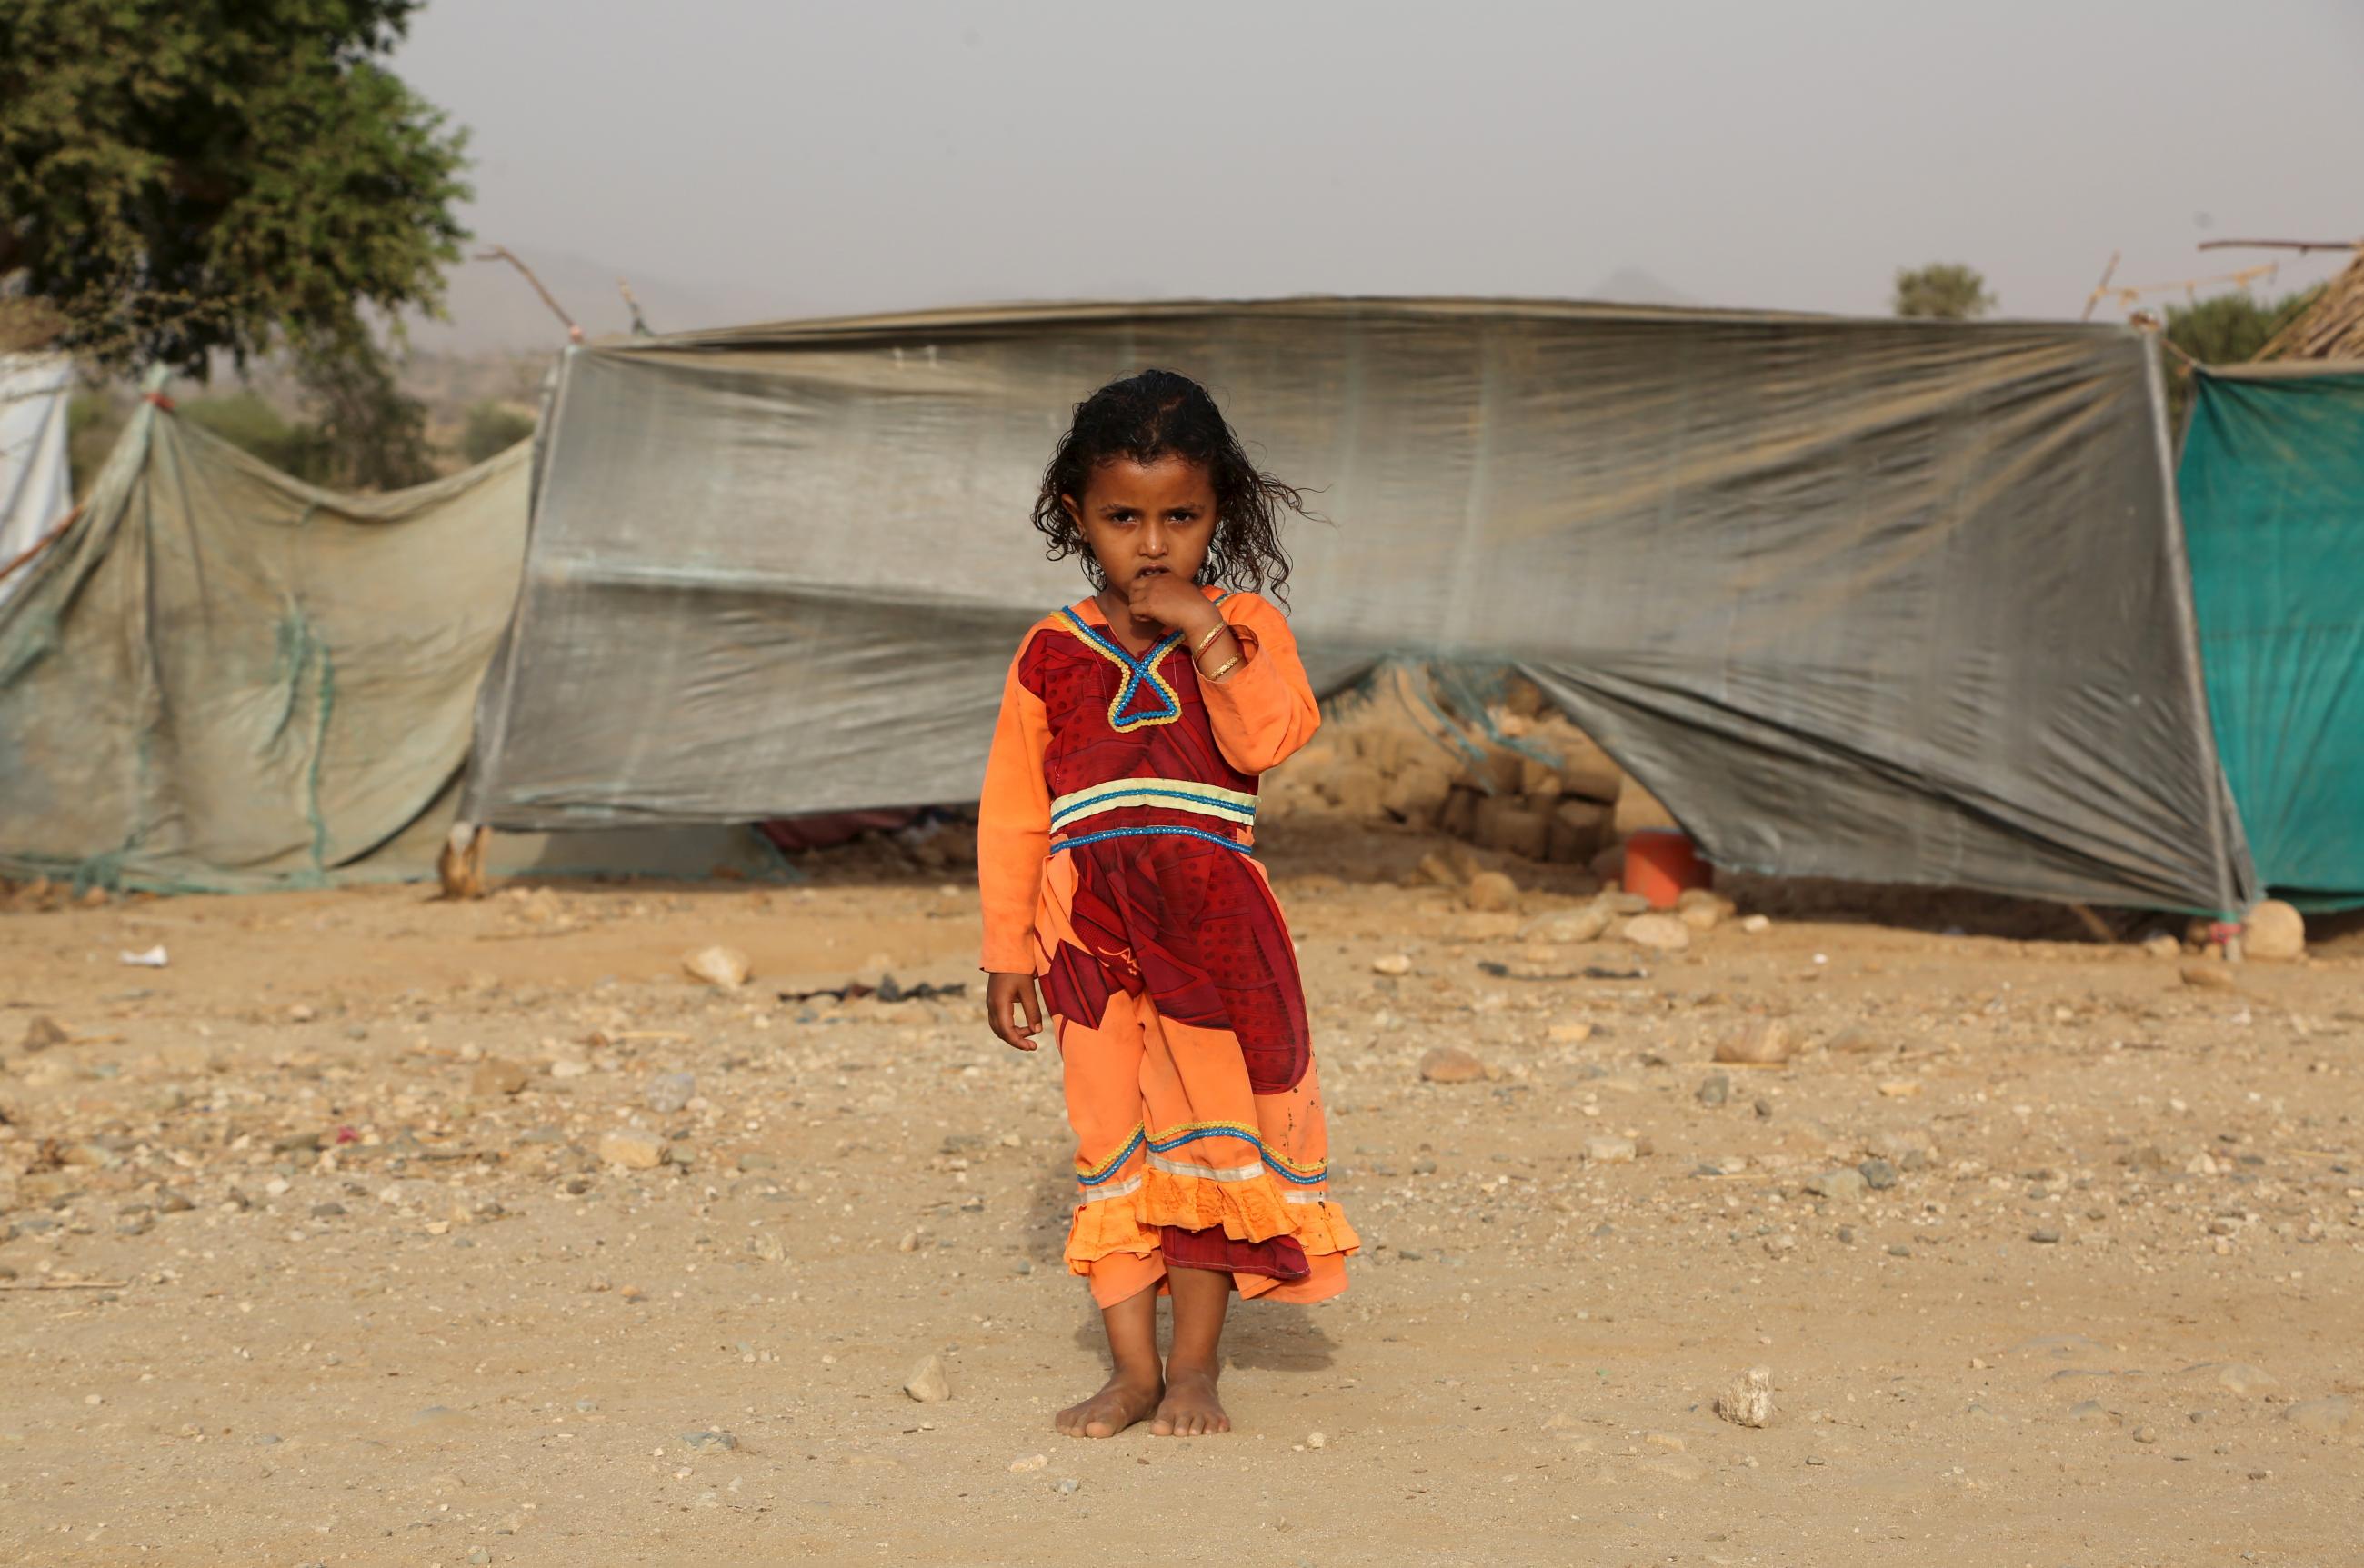 A girl stands outside her family’s hut at the Shawqaba camp for people forced to leave their villages due to war in Yemen's northwestern province of Hajjah. Photo taken on March 12, 2016.